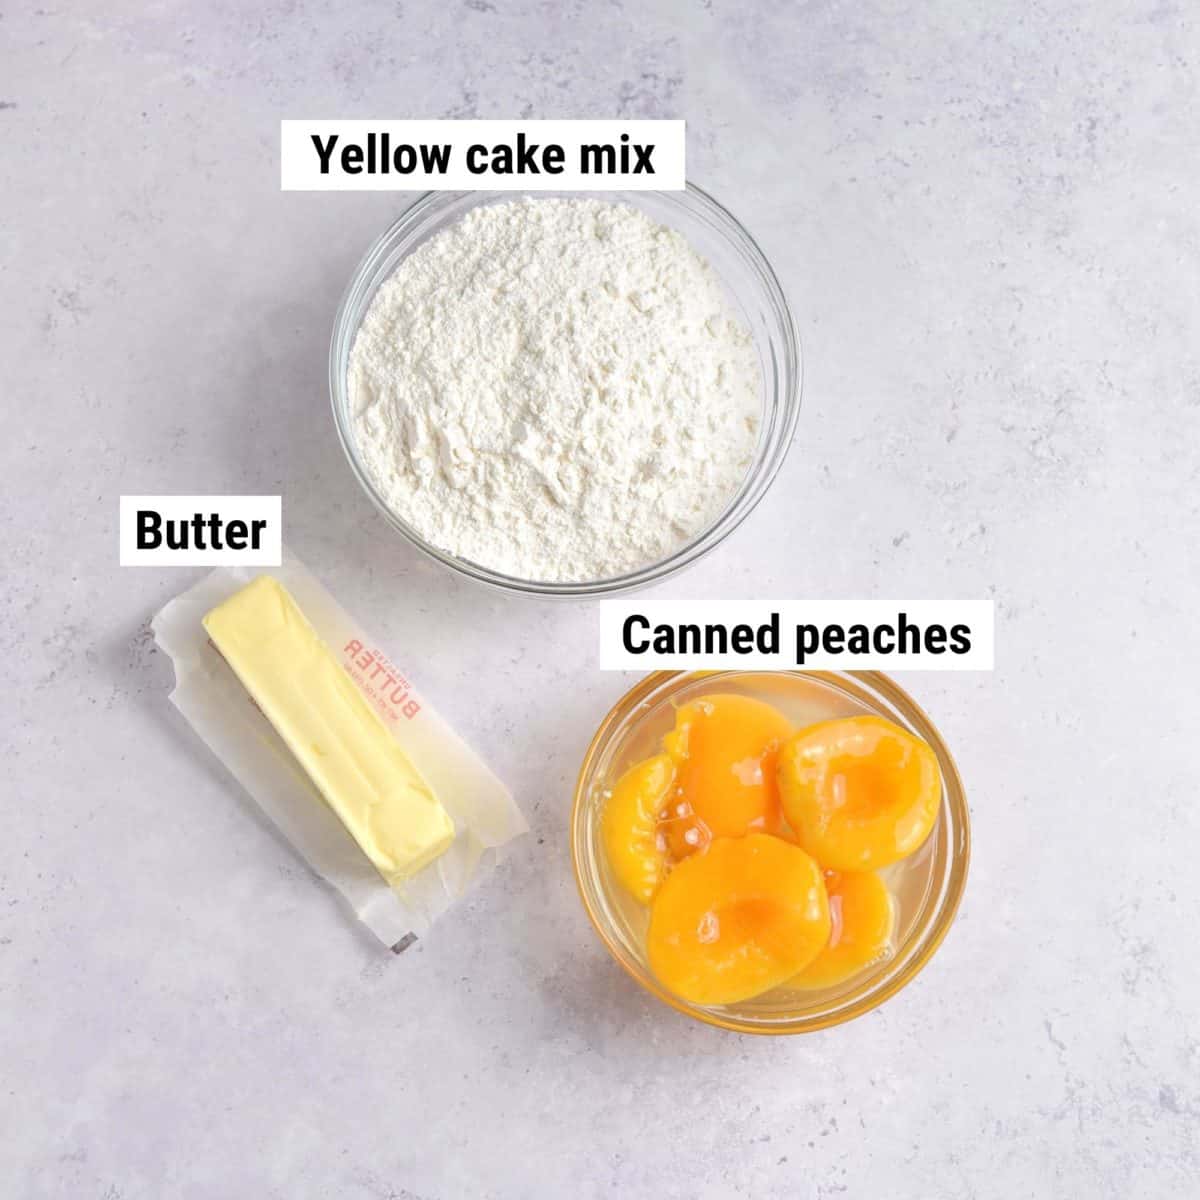 The ingredients used to make peach cobbler with cake mix laid out on a table.